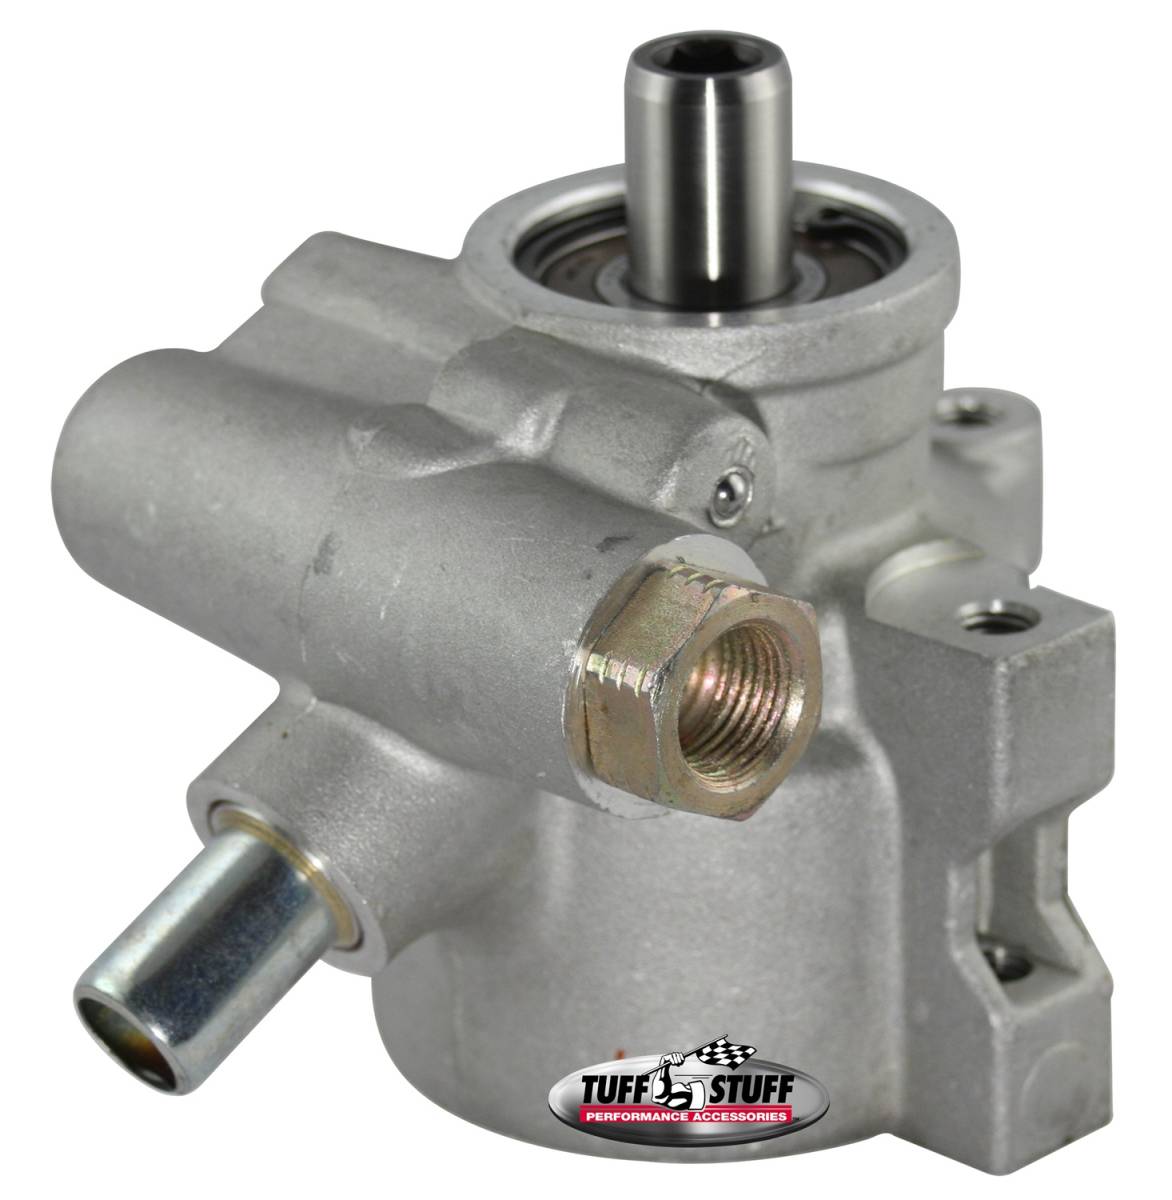 Tuff Stuff Performance - Type II Alum. Power Steering Pump M16 And 5/8 in. OD Return Tube 8mm Through Hole Mounting Aluminum For Street Rods/Custom Vehicles w/Limited Engine Space Factory Cast PLUS+ 6175AL-3